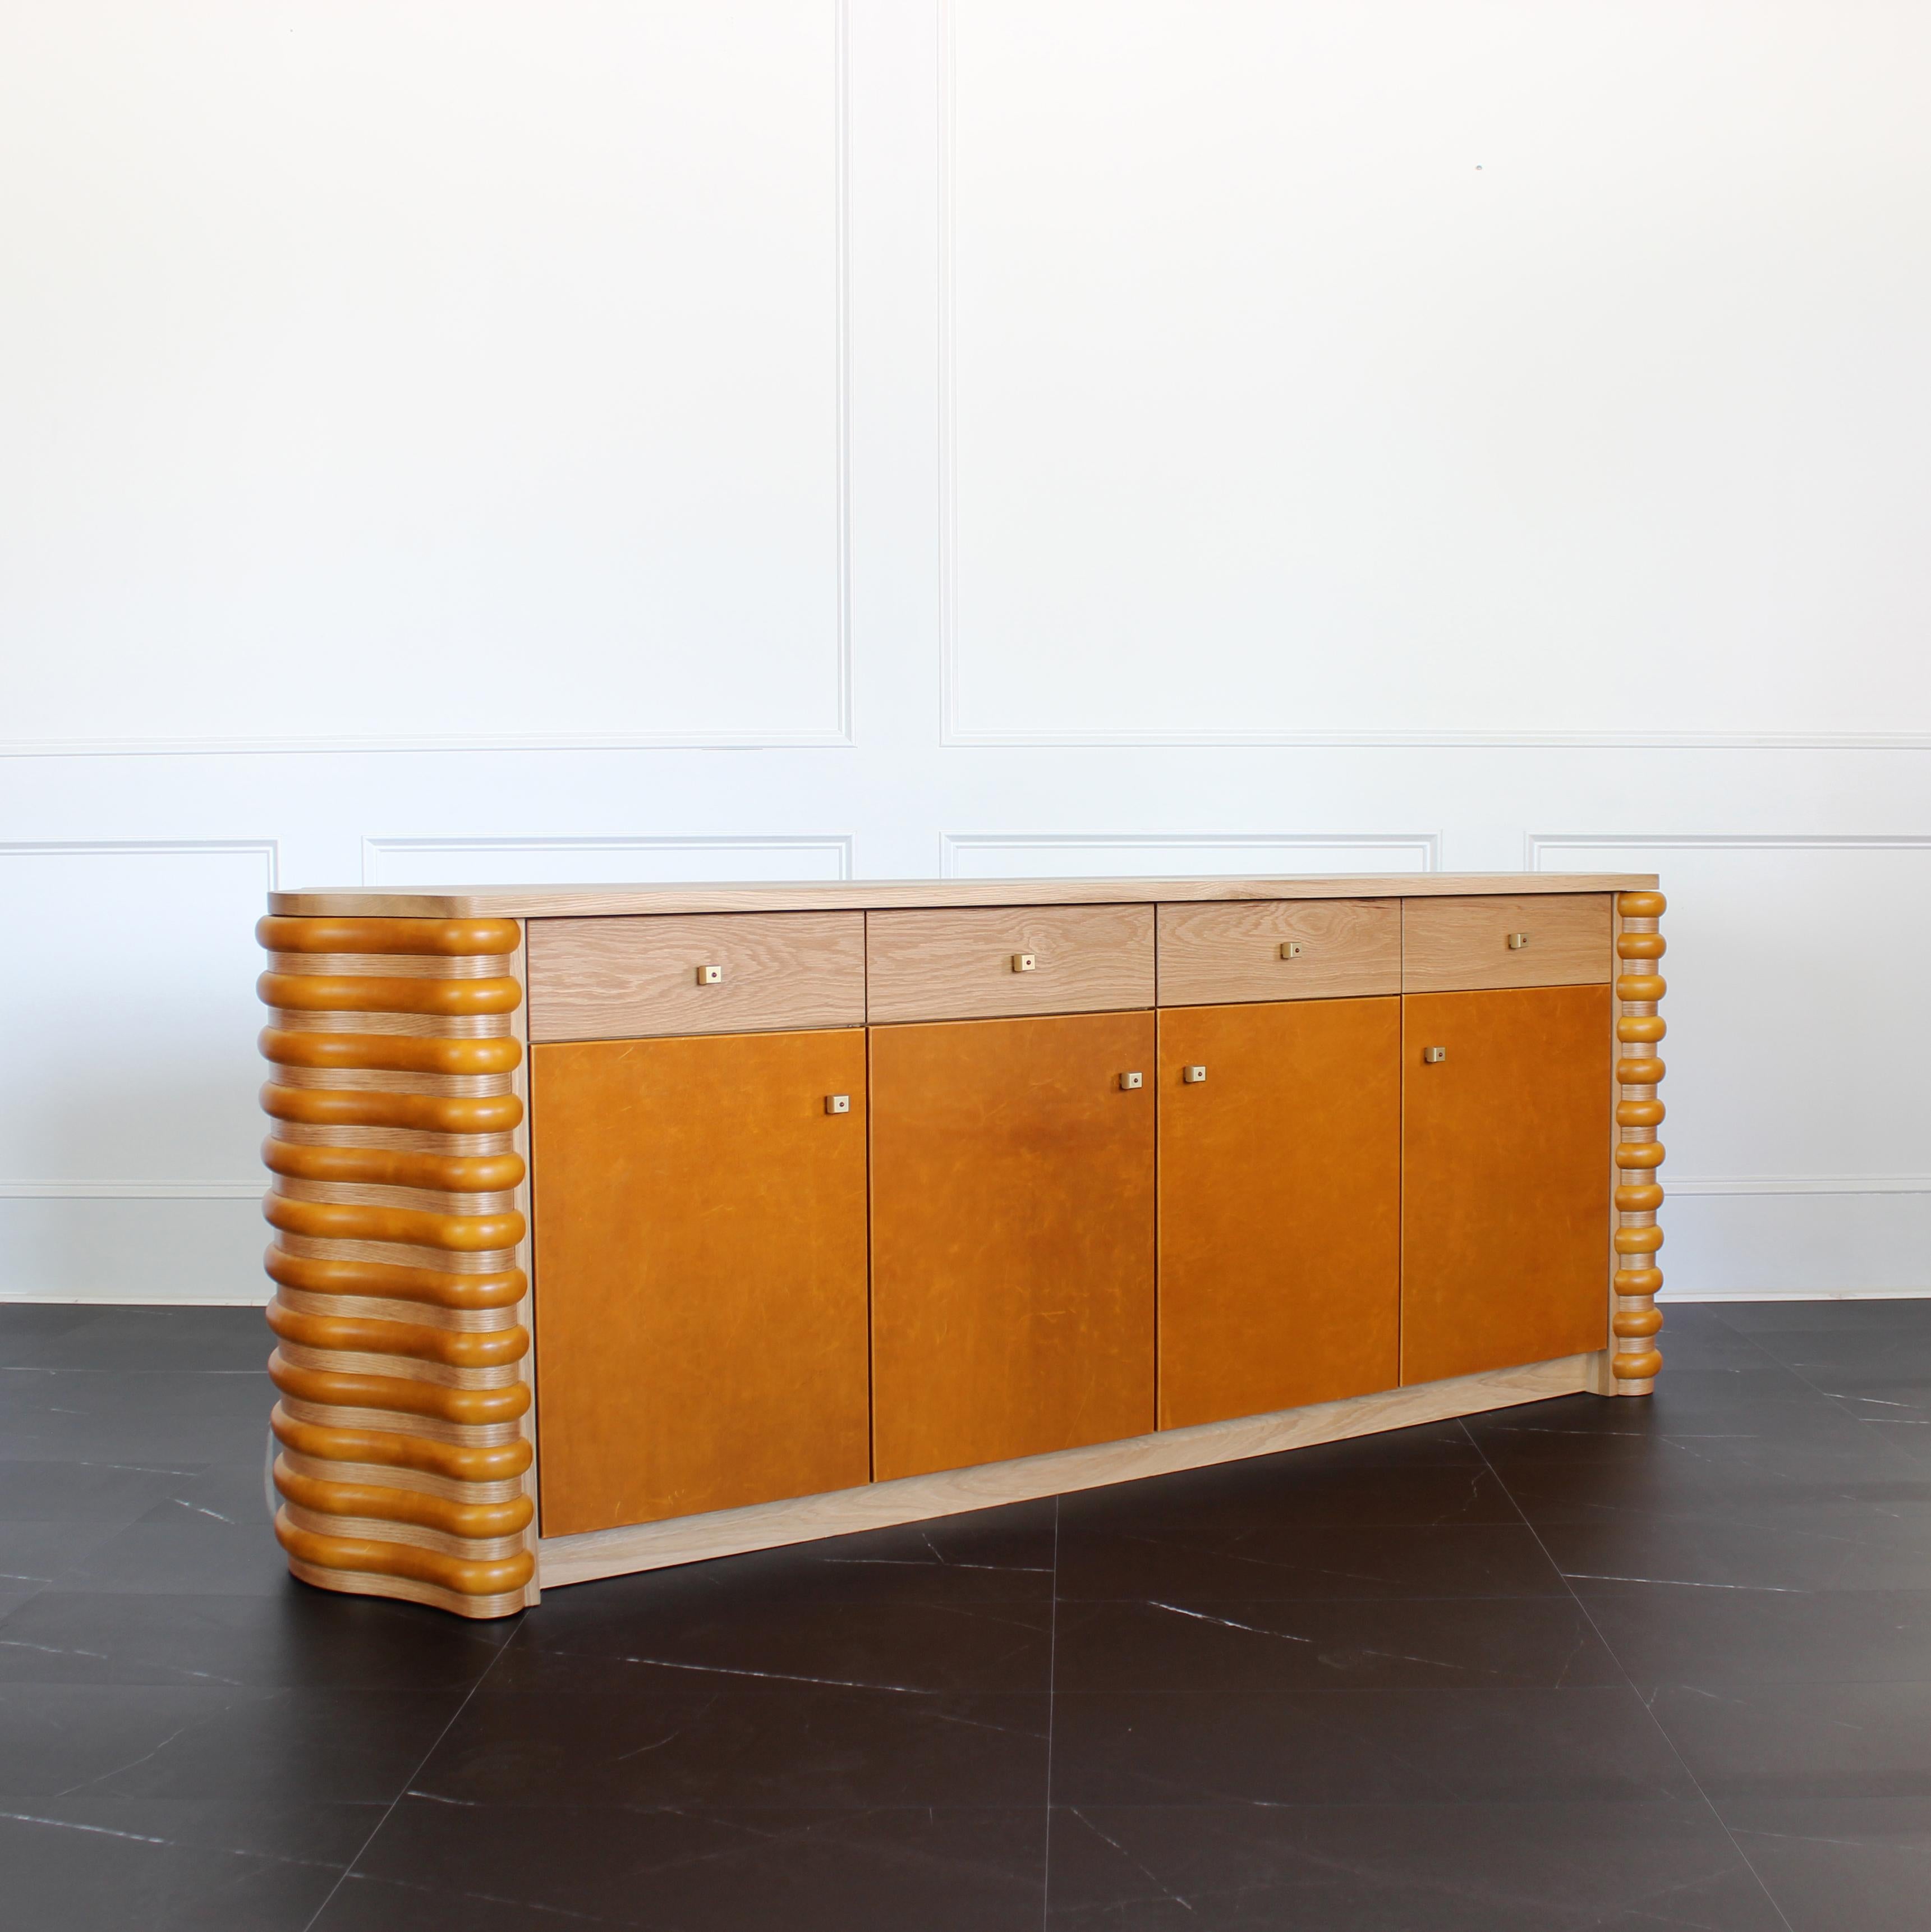 The Roslin Credenza by Crump and Kwash 

Features both solid wood and laminate construction / low VOC acrylic finish / sustainably sourced leather wrapped doors / premium, full extension, soft close drawer slides / solid maple, dovetailed drawer